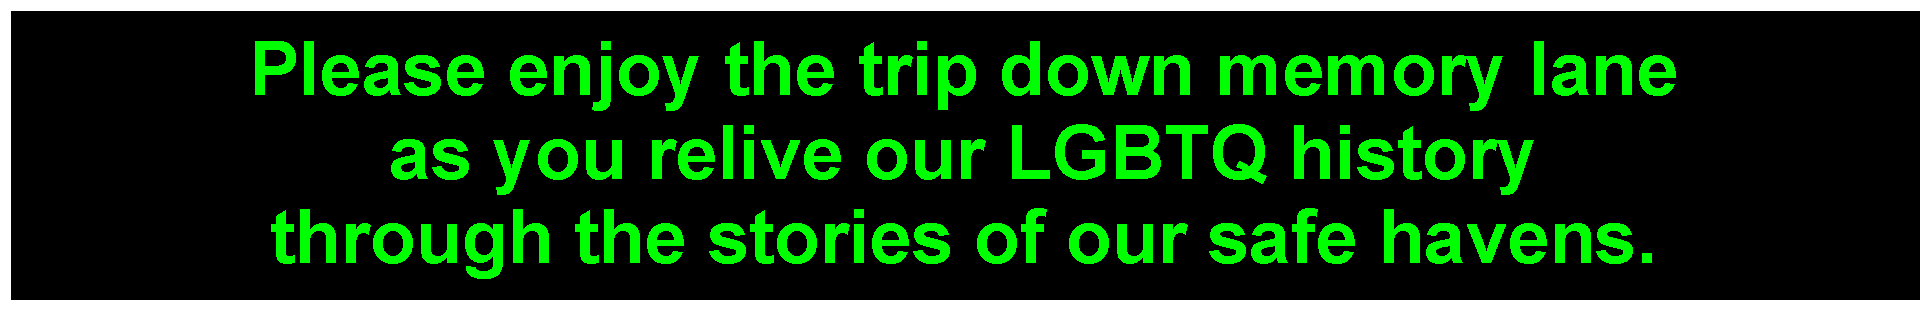 Please enjoy the trip down memory lane as you relive our LGBTQ history through the stories of our safe havens. Our GayBarchives project features the logos of more than 3000 gay bars across the United States and, to a lesser extend, around the world. 